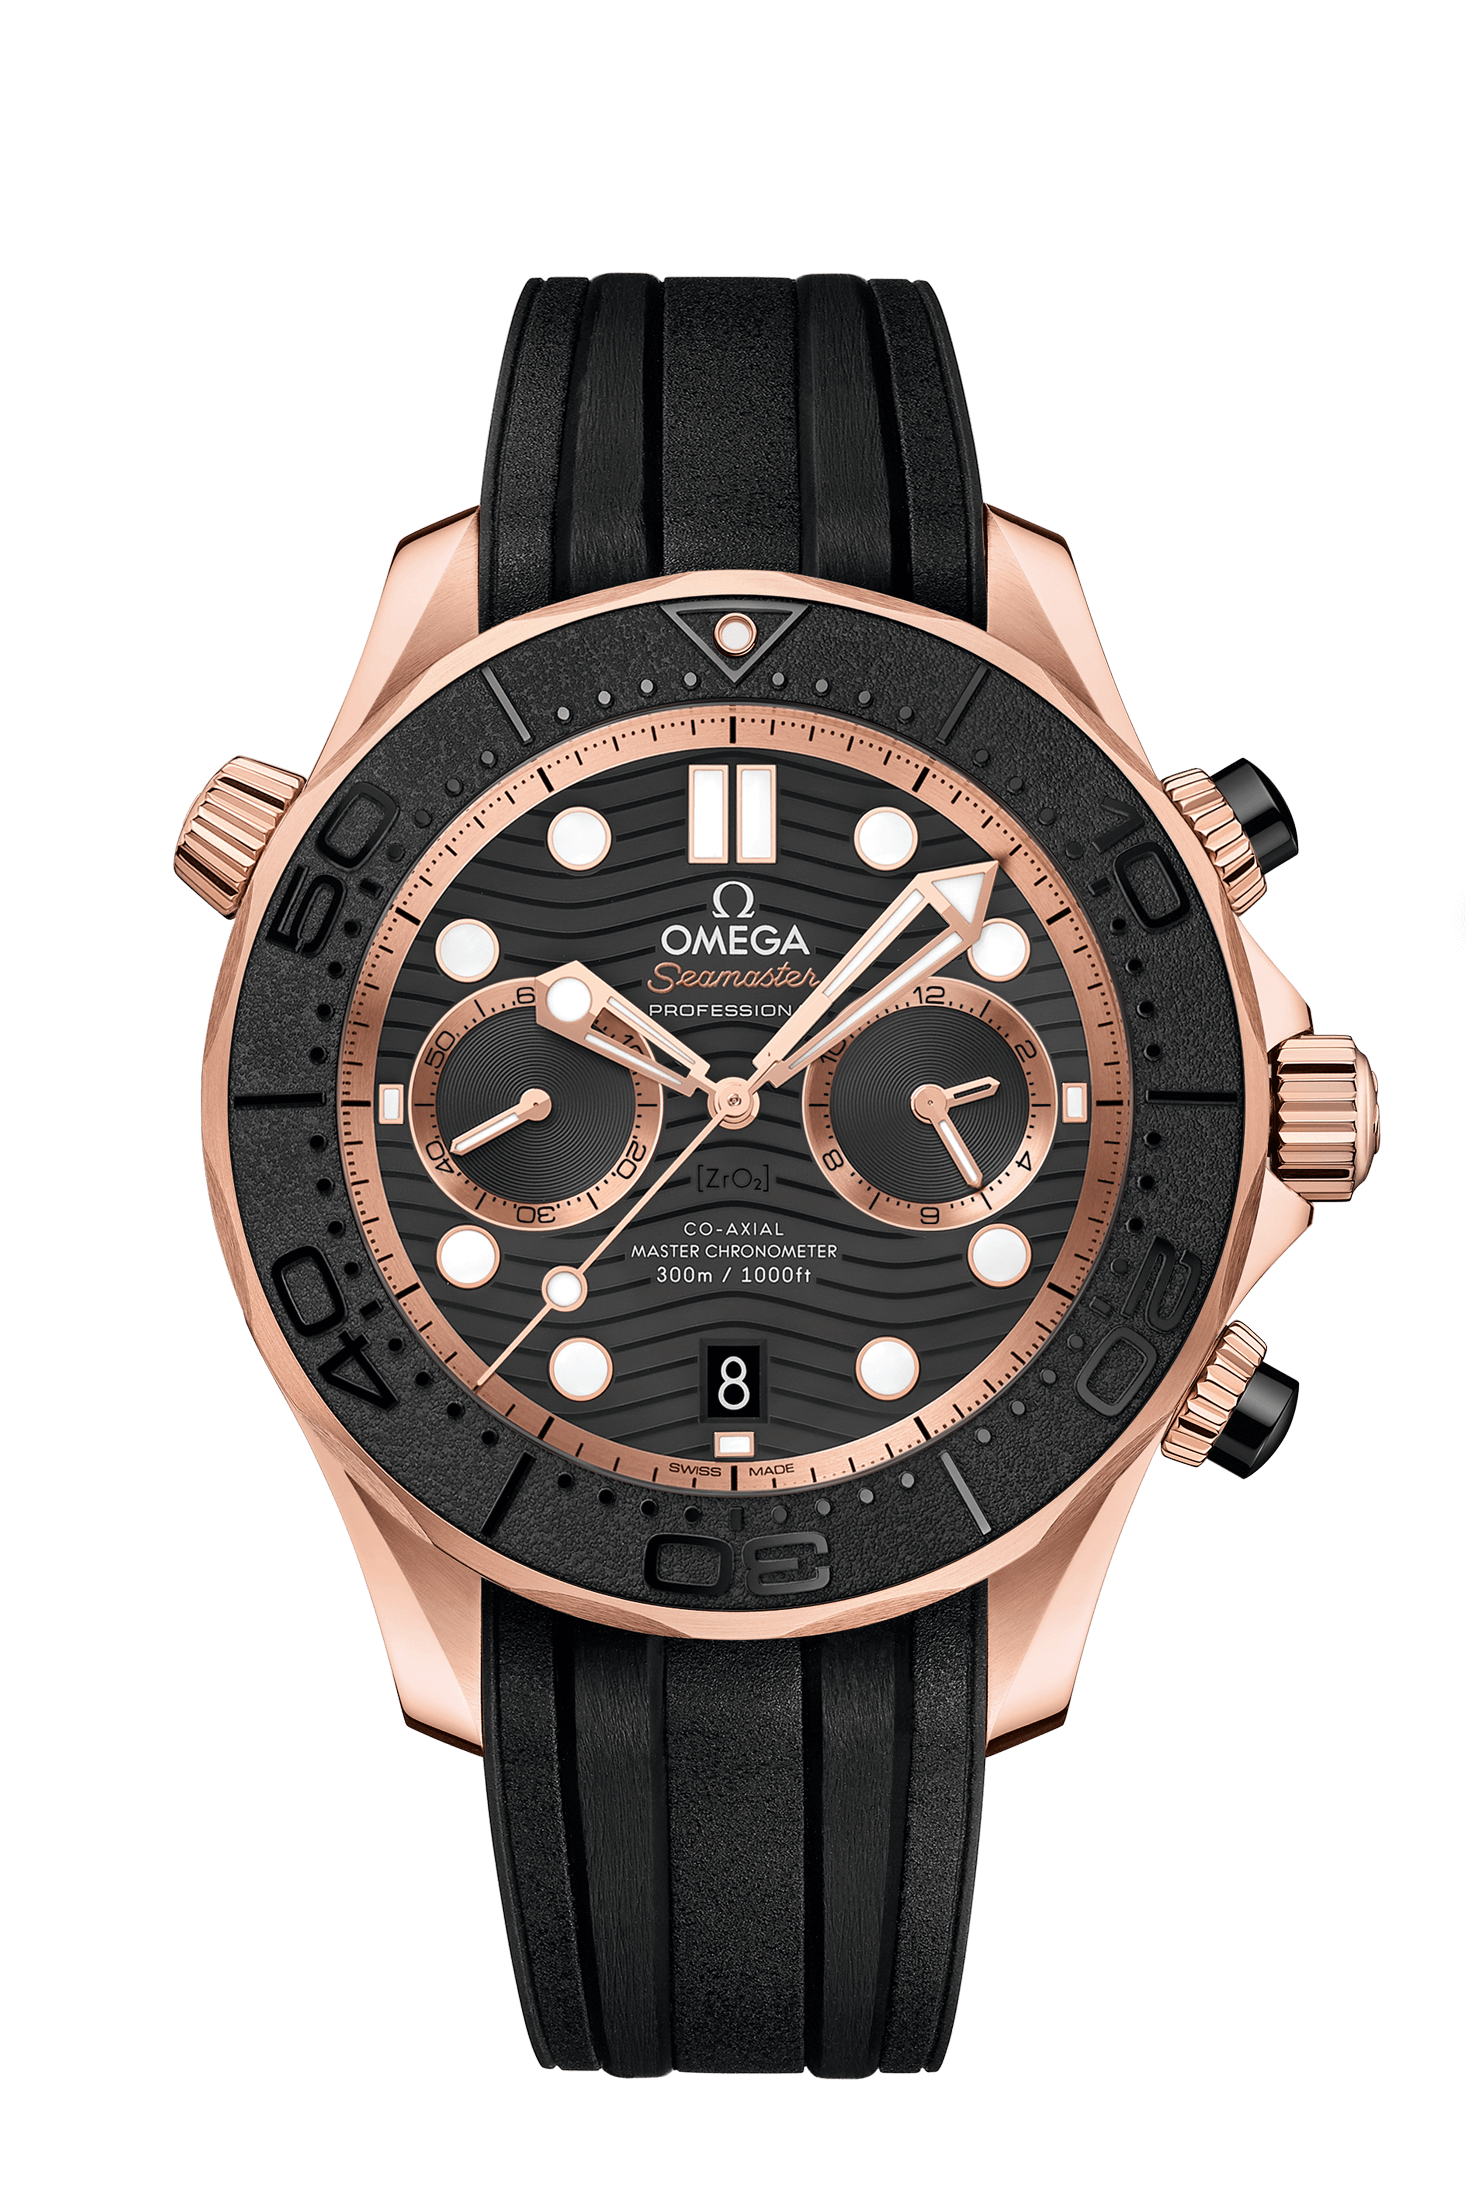 Men's watch / unisex  OMEGA, Diver 300m Co Axial Master Chronometer Chronograph / 44mm, SKU: 210.62.44.51.01.001 | watchapproach.com